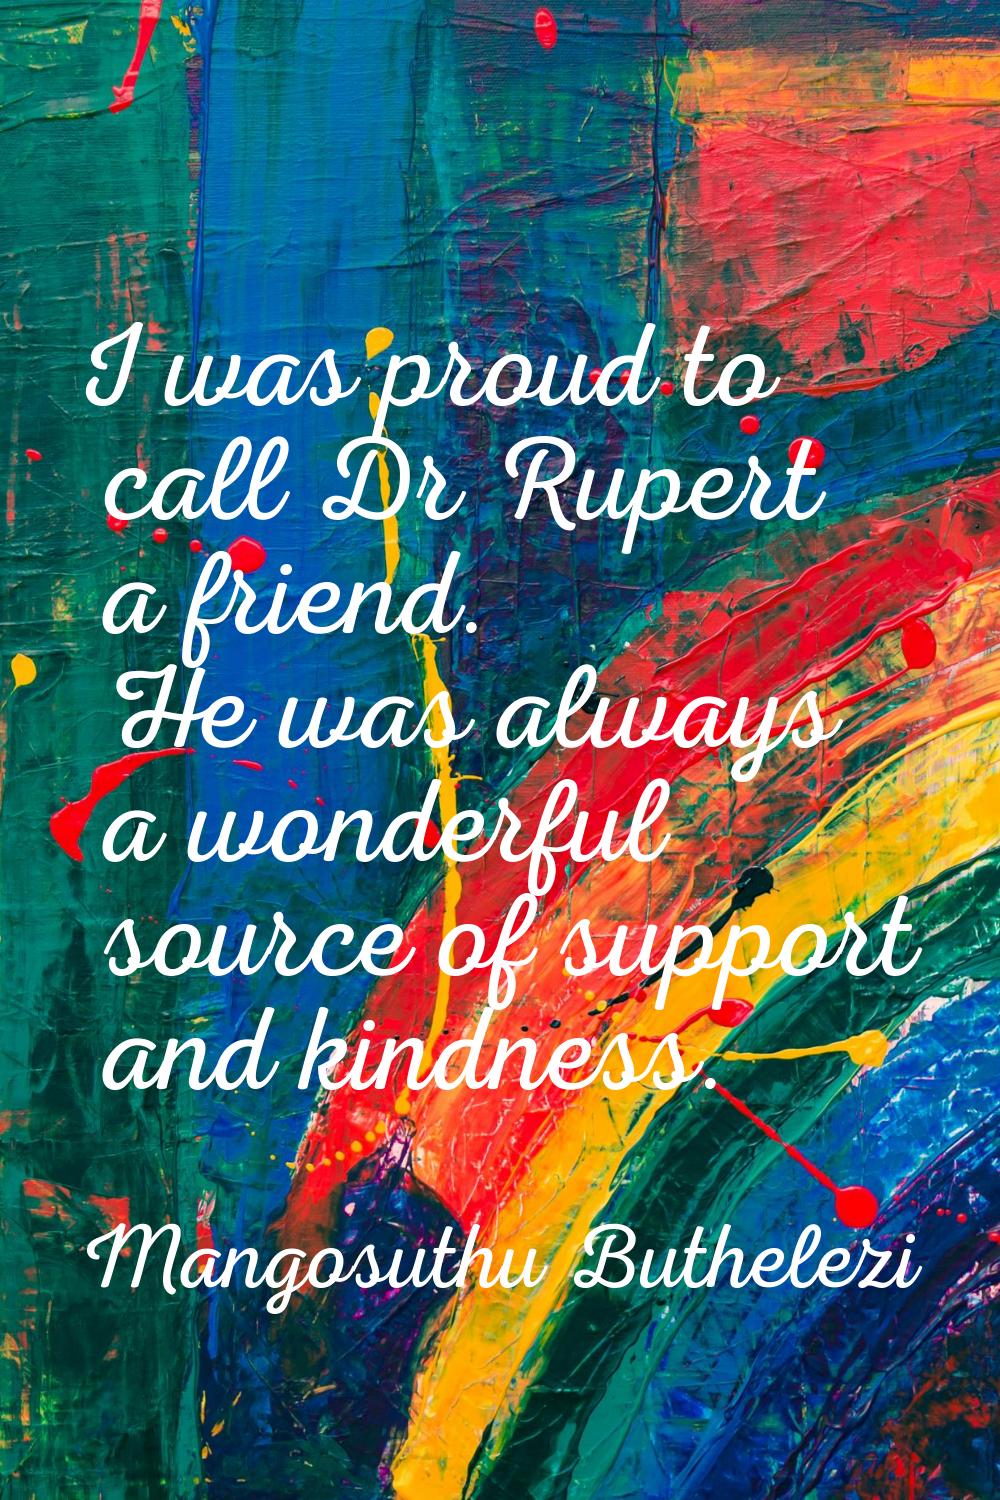 I was proud to call Dr Rupert a friend. He was always a wonderful source of support and kindness.